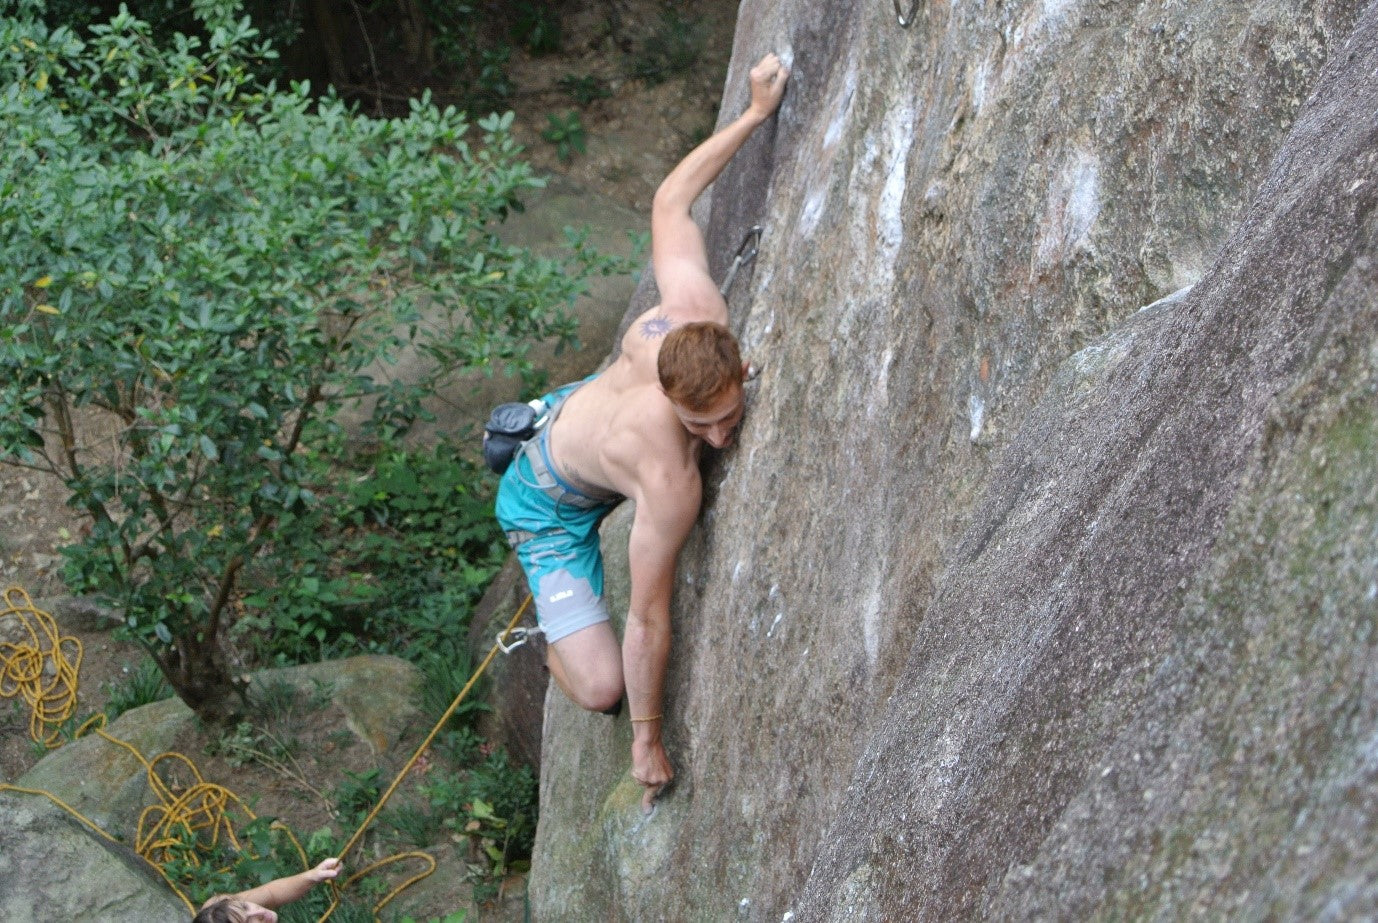 Stoicism in climbing